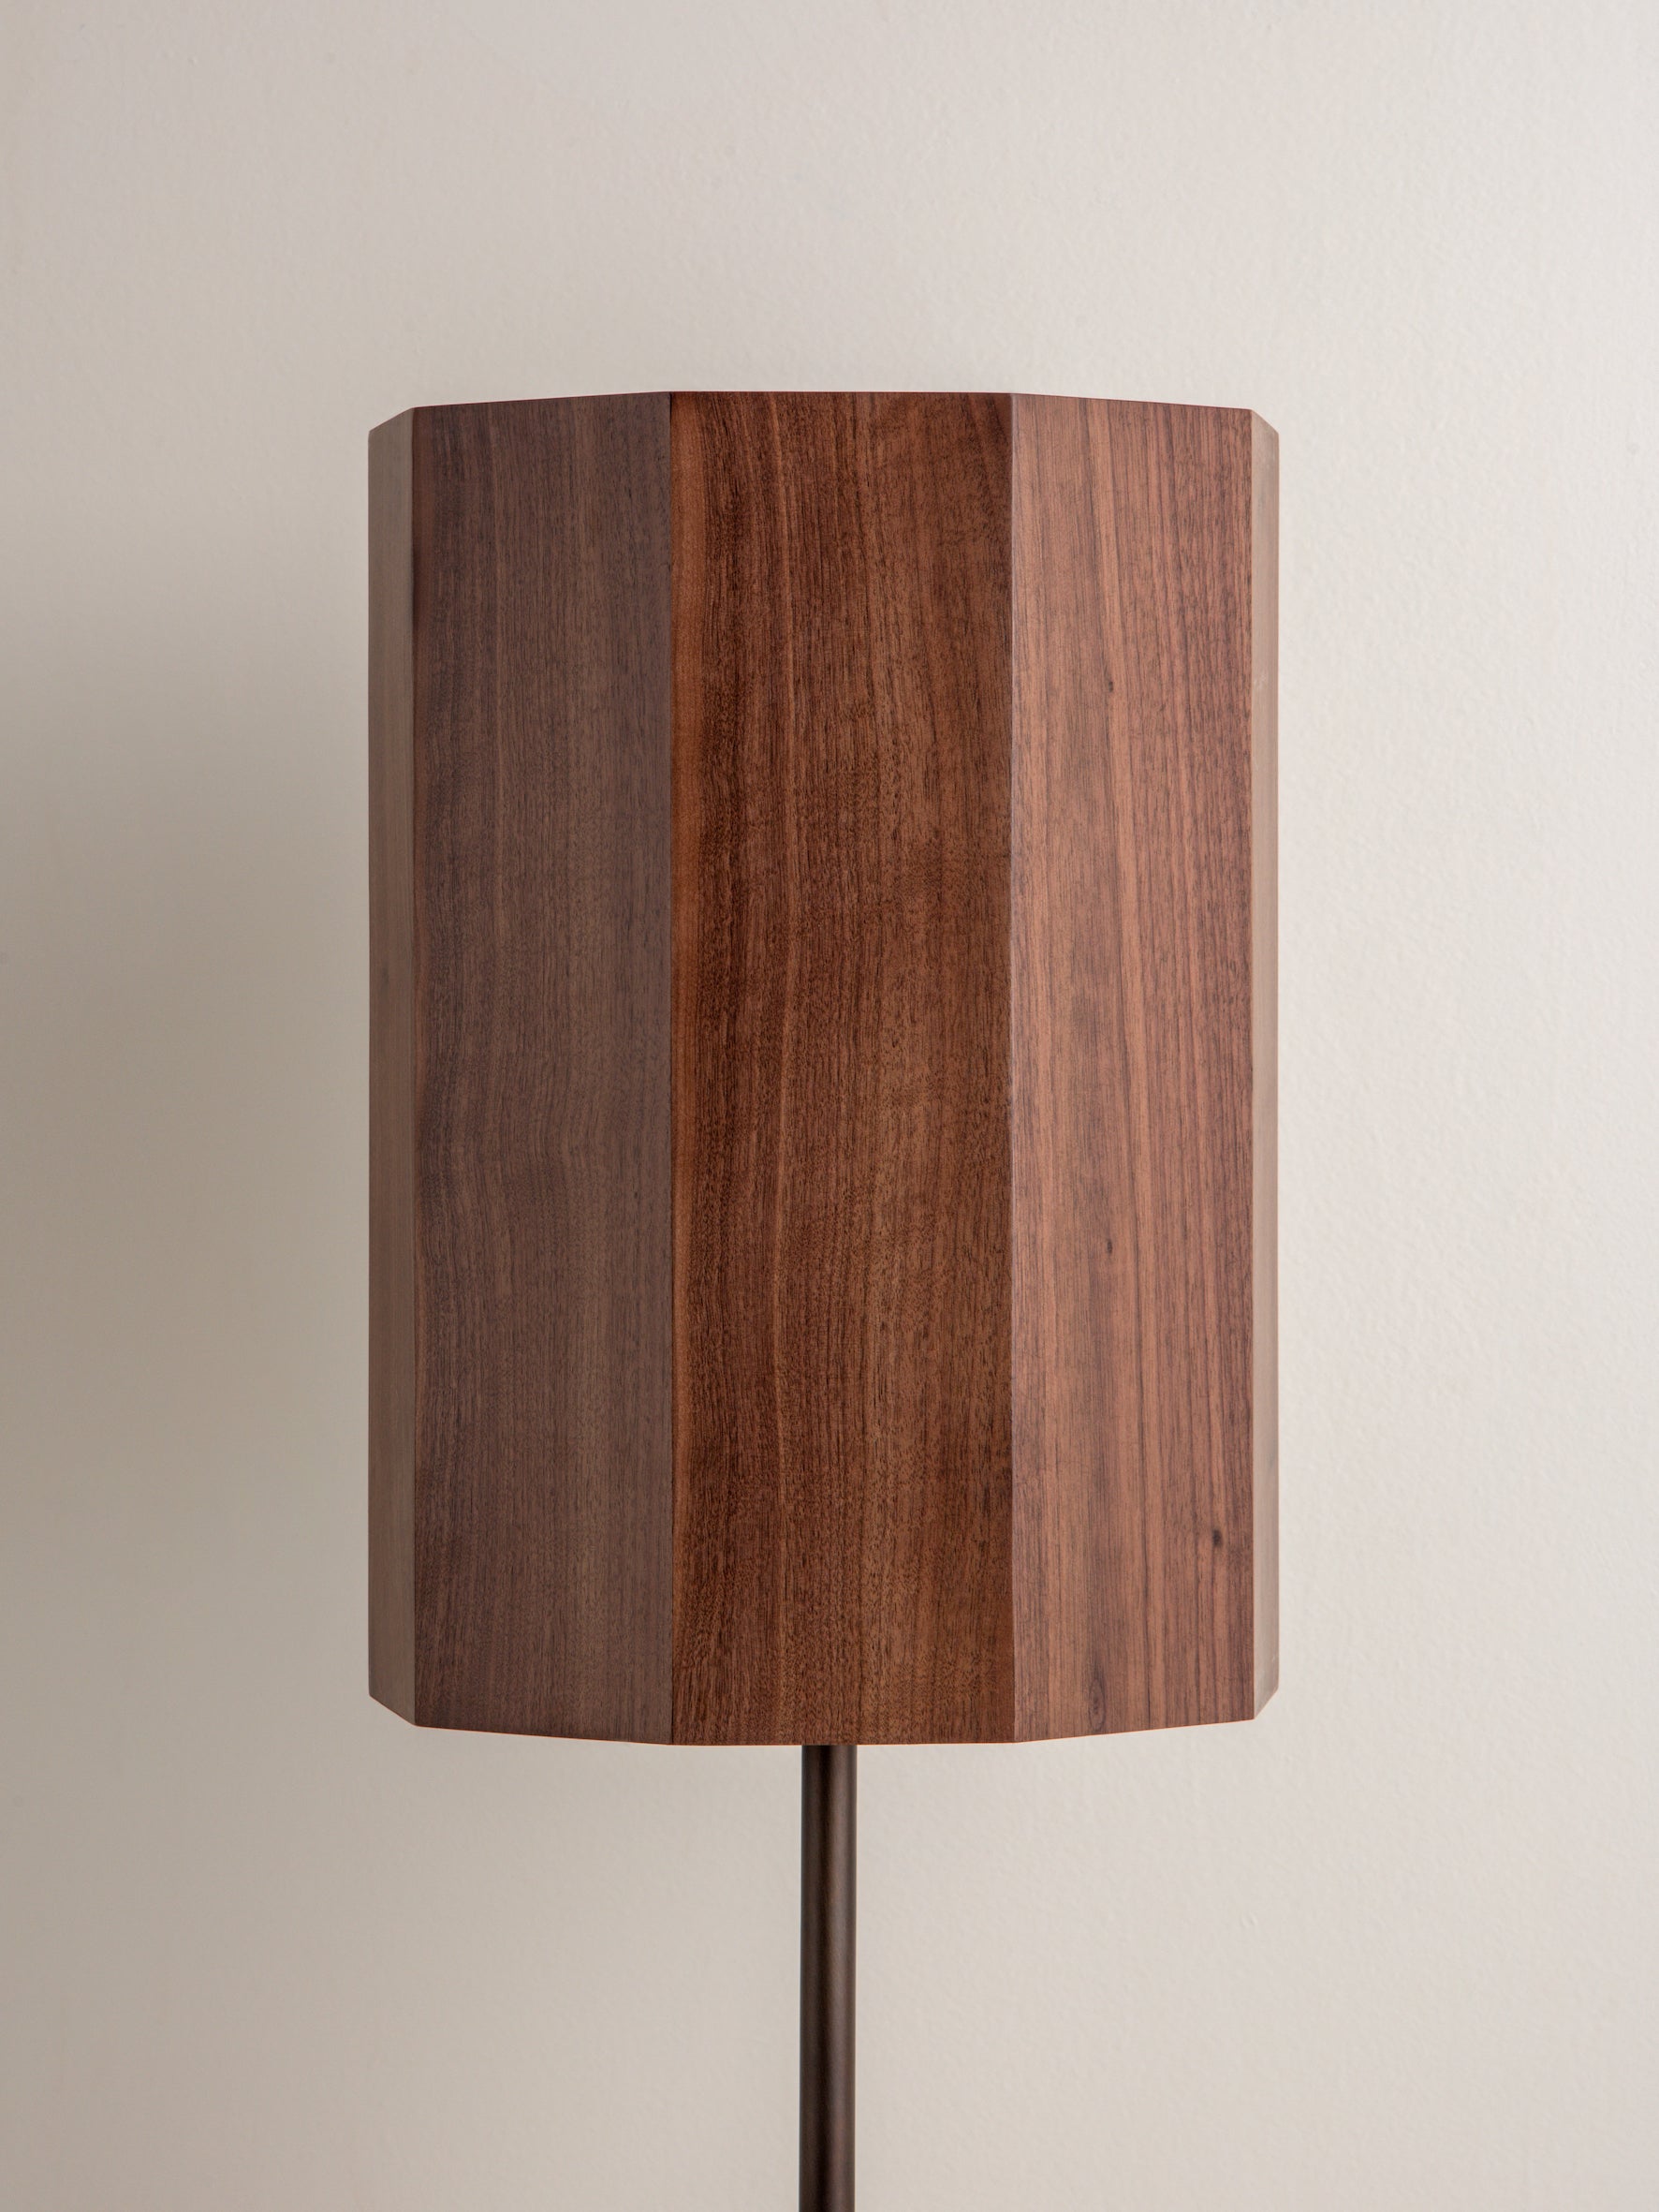 Editions walnut wood lampshade - shade only | Table Lamp | Lights & Lamps | UK | Modern Affordable Designer Lighting